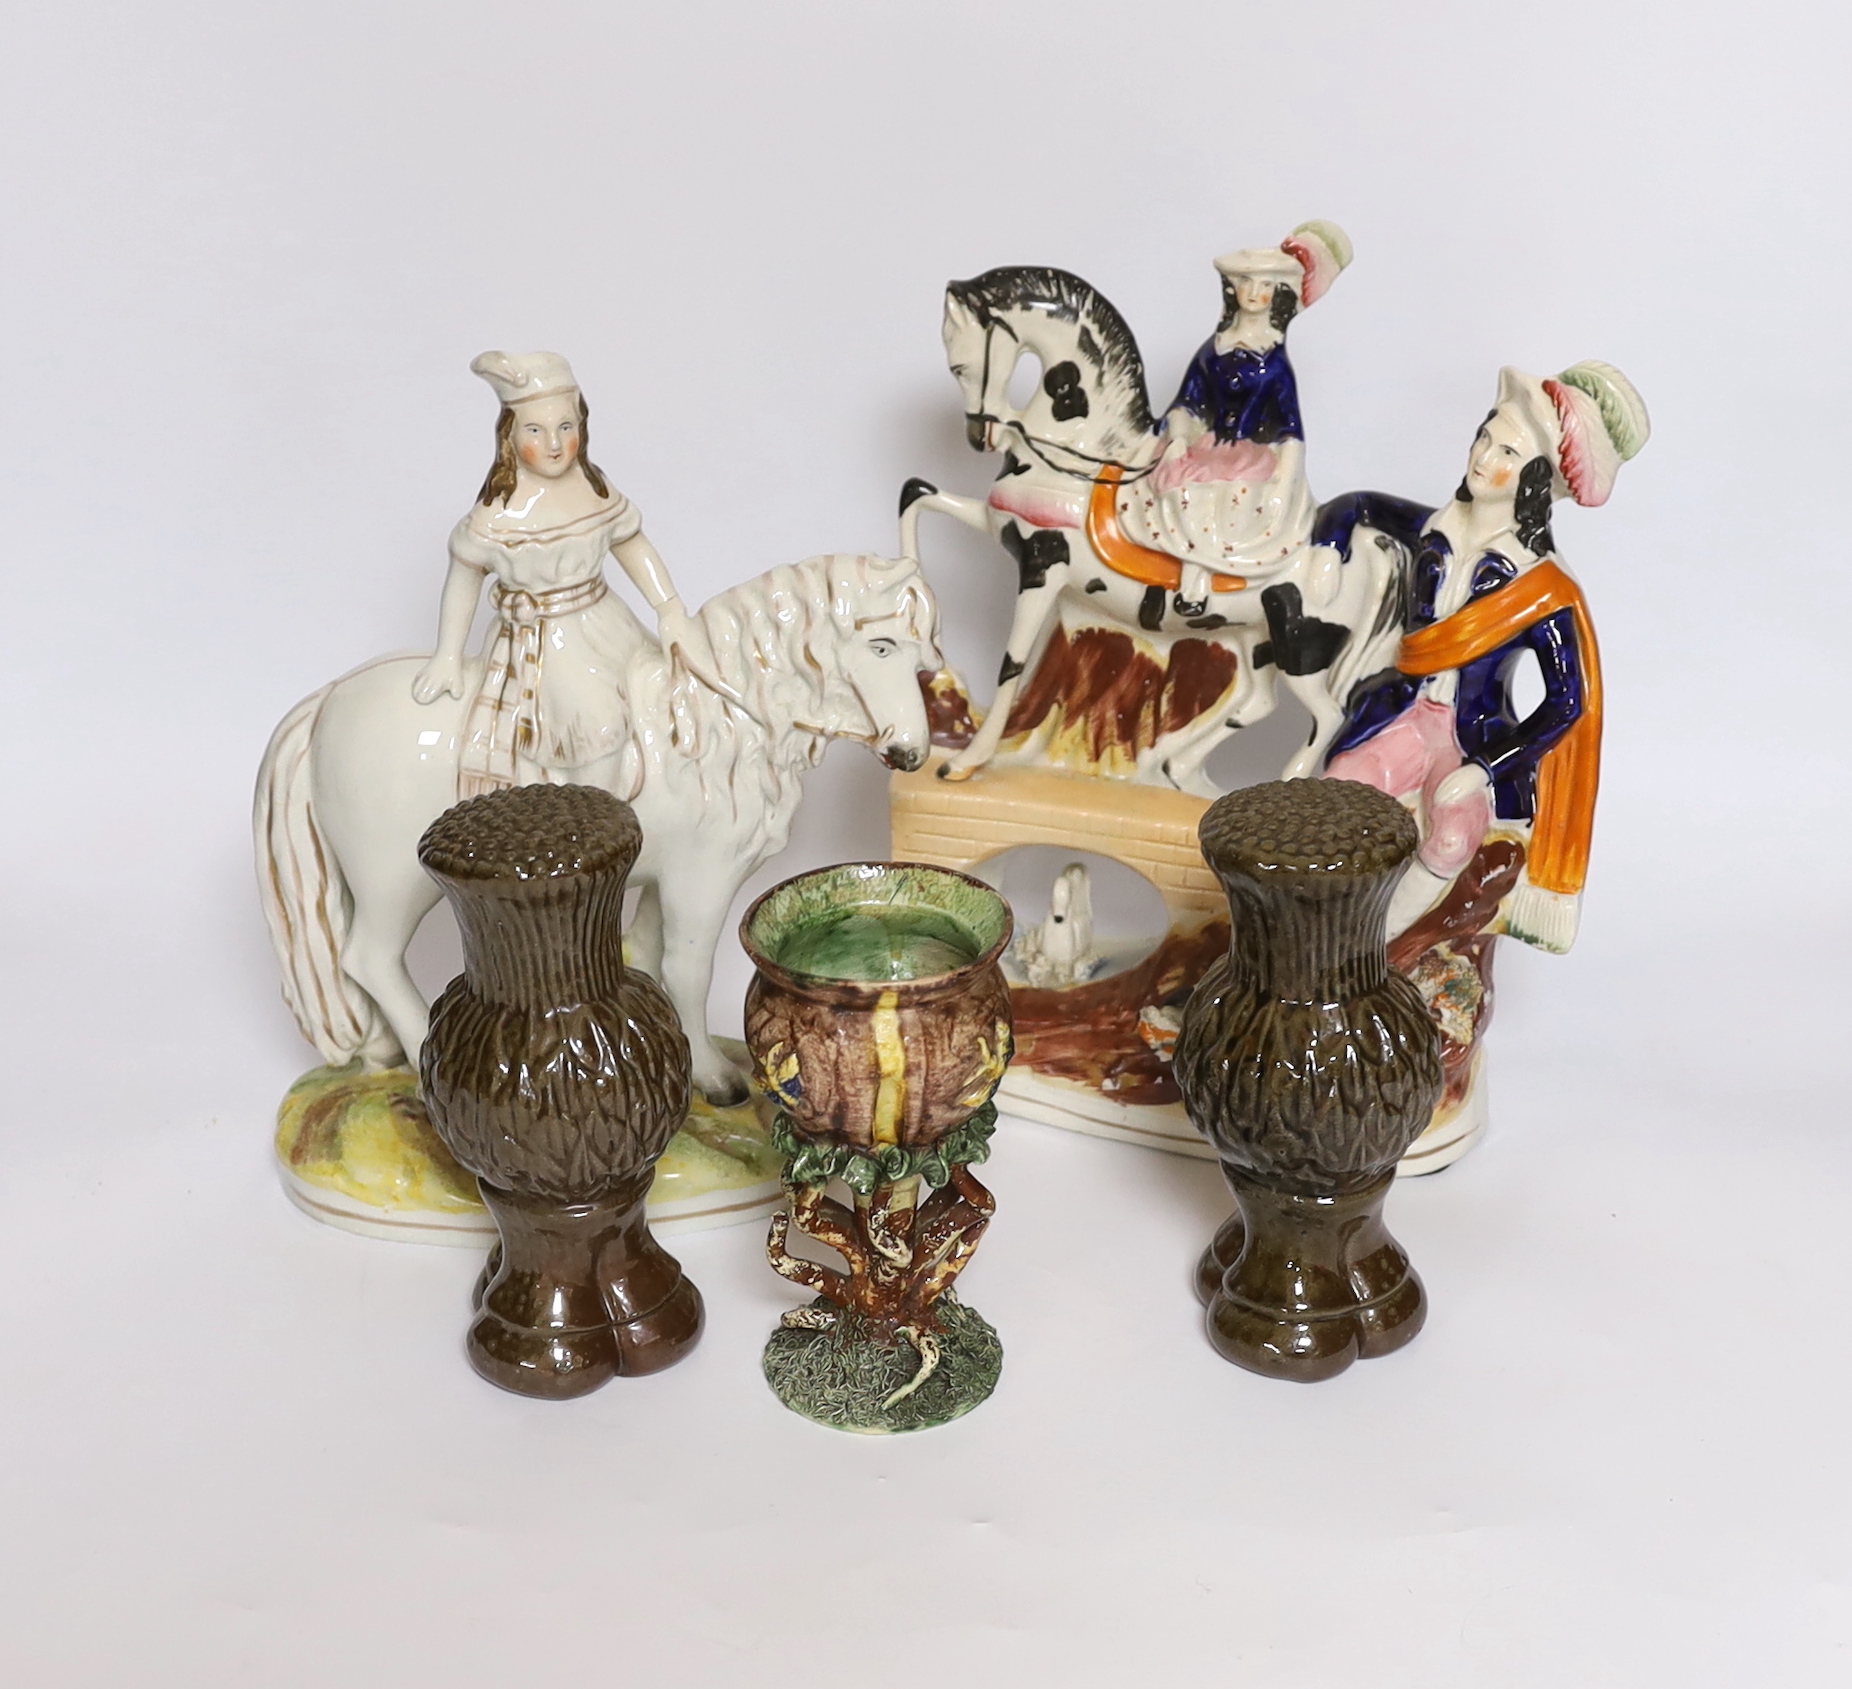 A rare Staffordshire horse group, a Princess Royal and pony group, a Palissy ware vase and a pair of